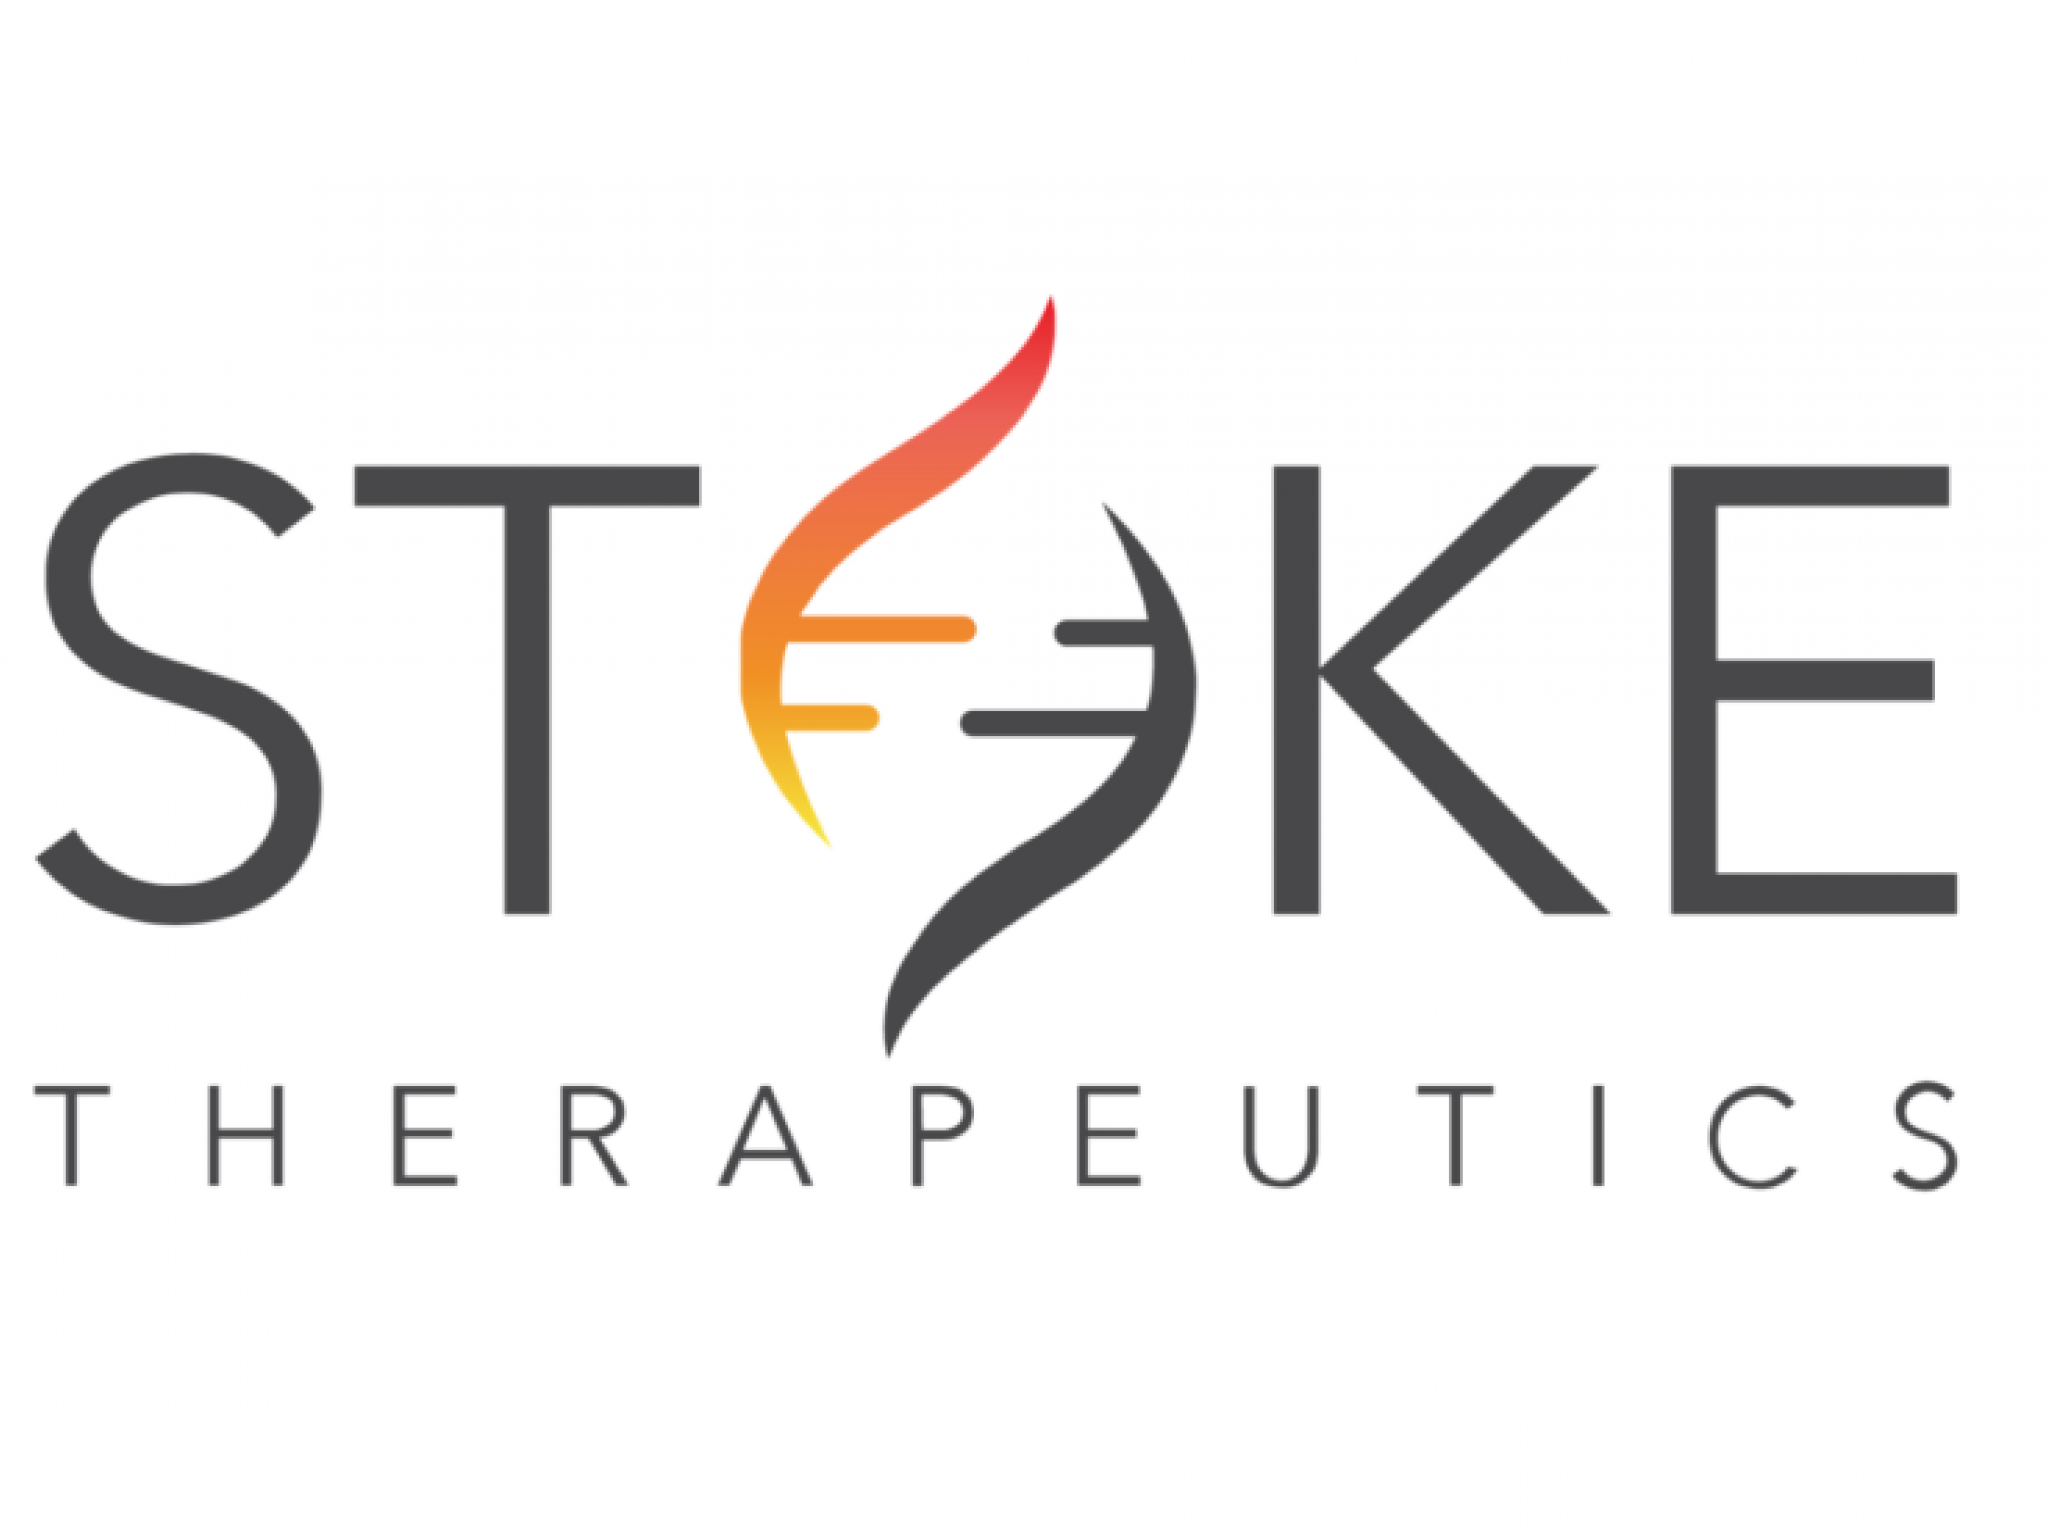  stoke-therapeutics-anti-epilepsy-drug-candidate-shows-substantial-sustained-reductions-in-seizure-frequency-in-pretreated-patients 